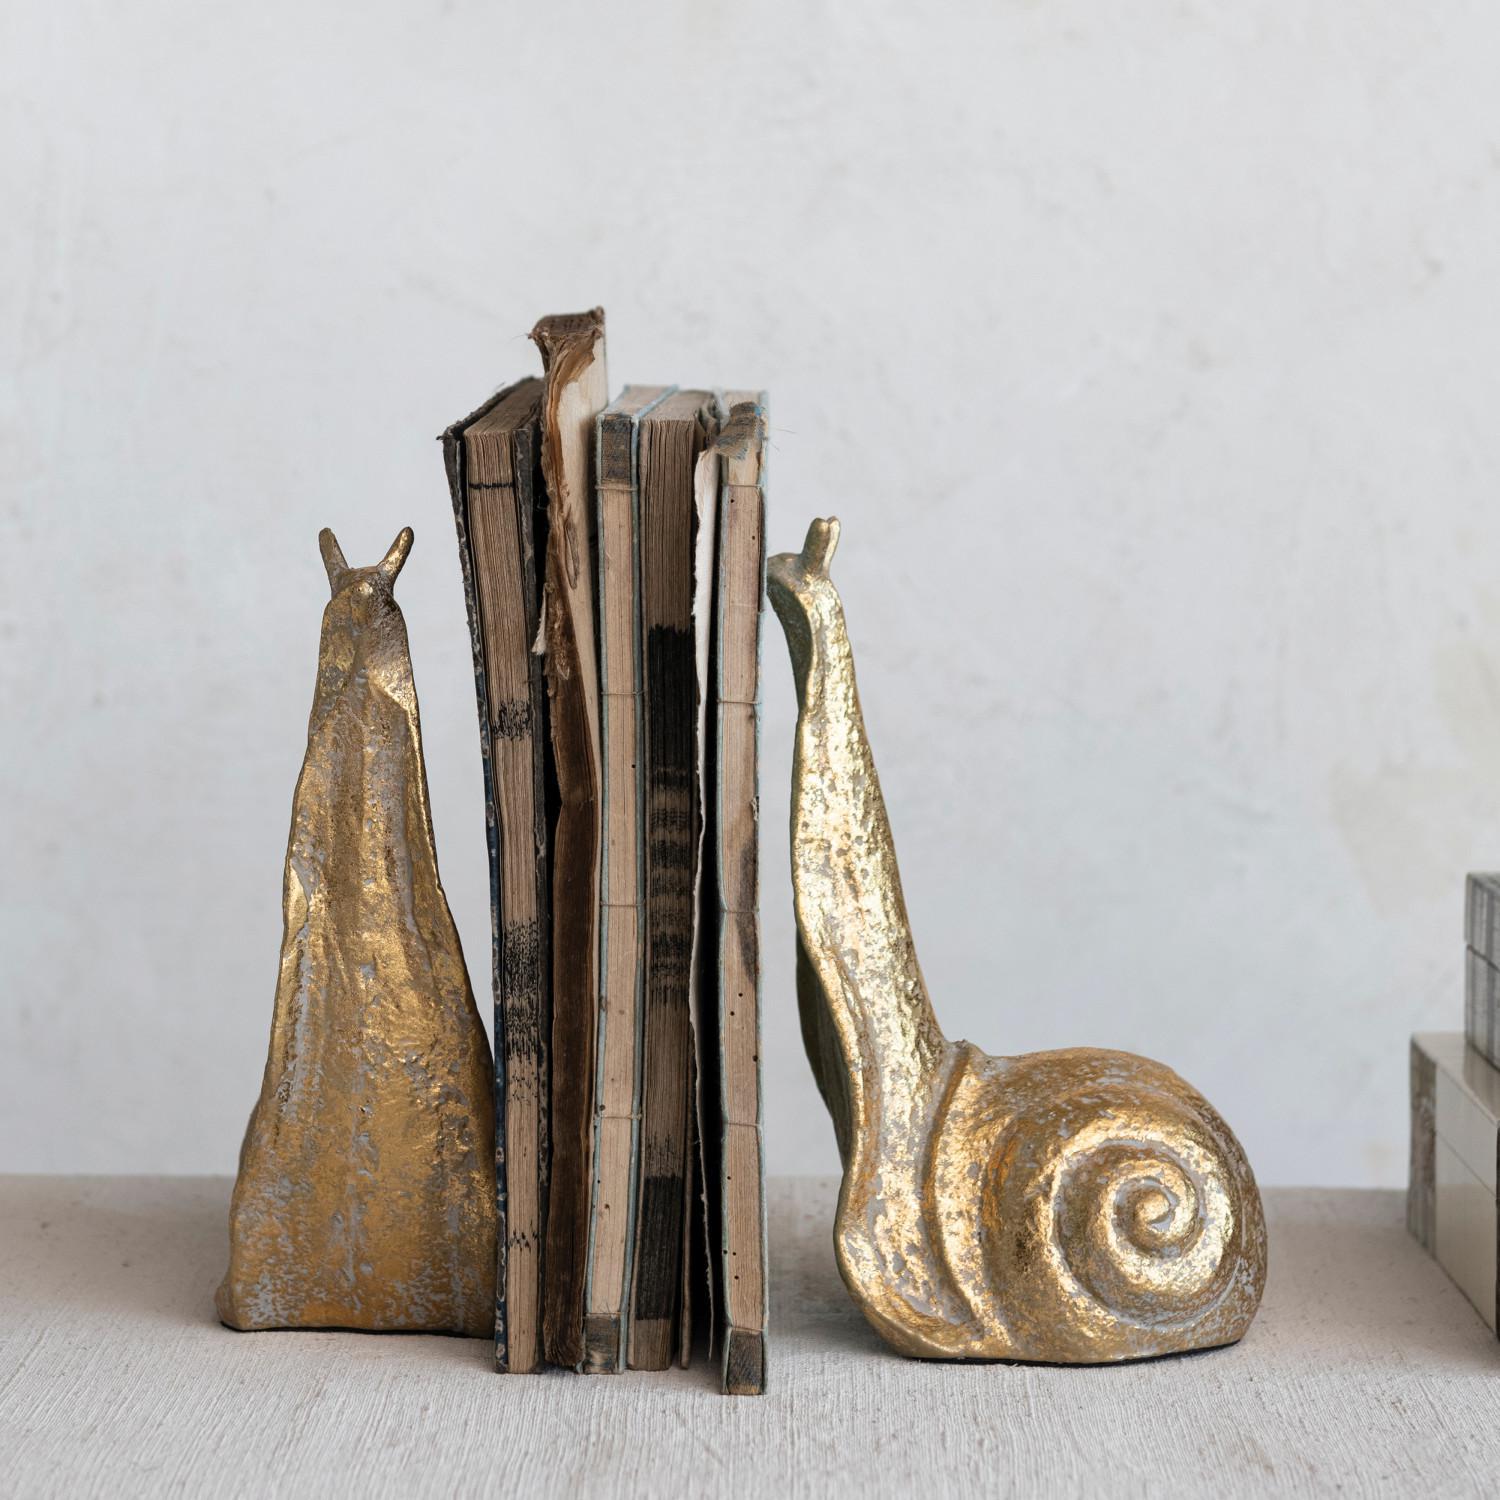 Snail Bookends